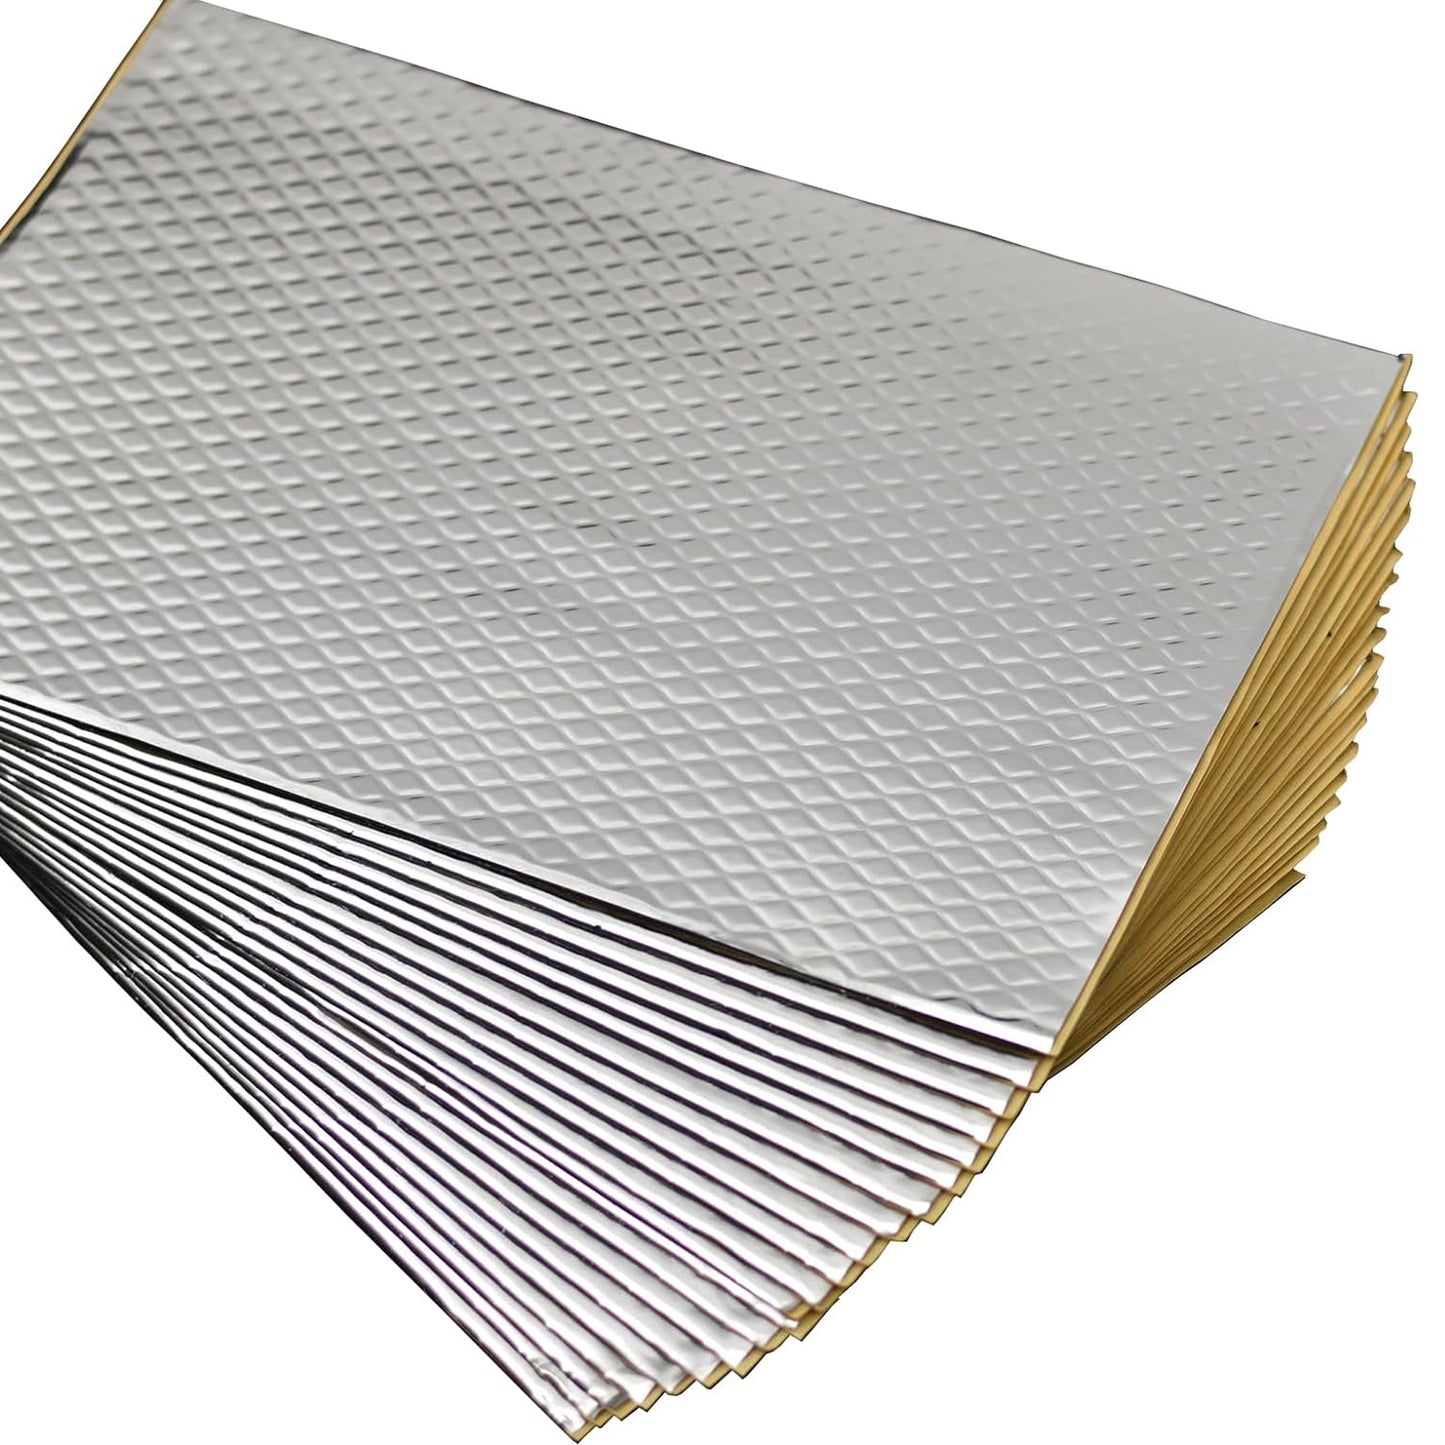 DS SOUND DEADENING SHEETS (QTY. 20)